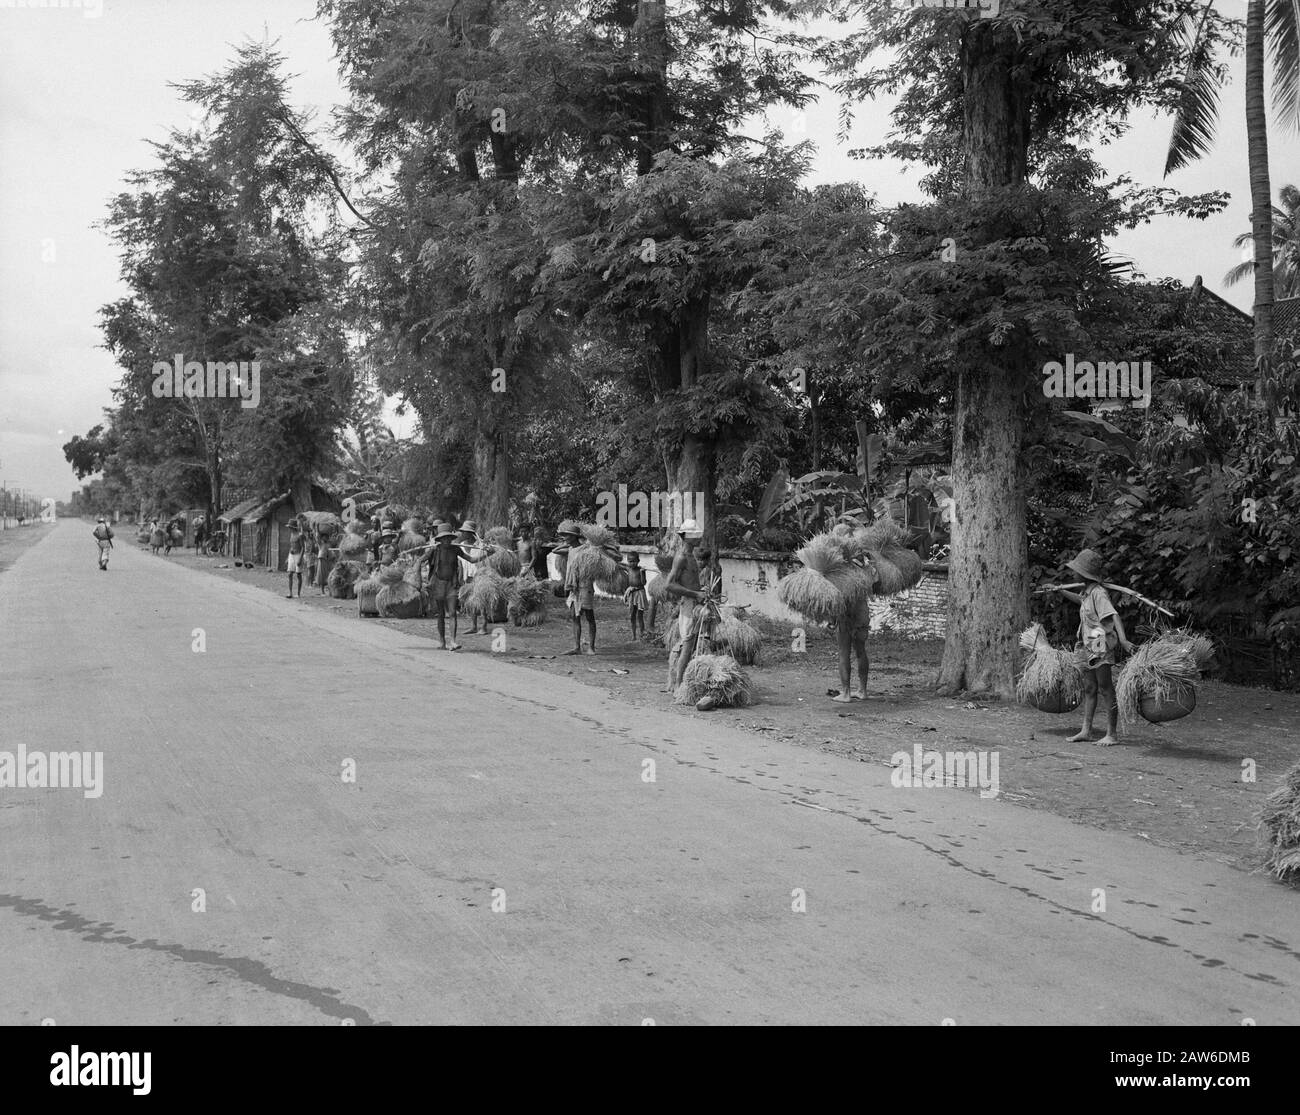 Military Information Service Surabaya  Landarebeiders transporting stand foot rice harvest along the side of a long straight road Date: February 1947 Location: Indonesia, Dutch East Indies, Surabaya Stock Photo